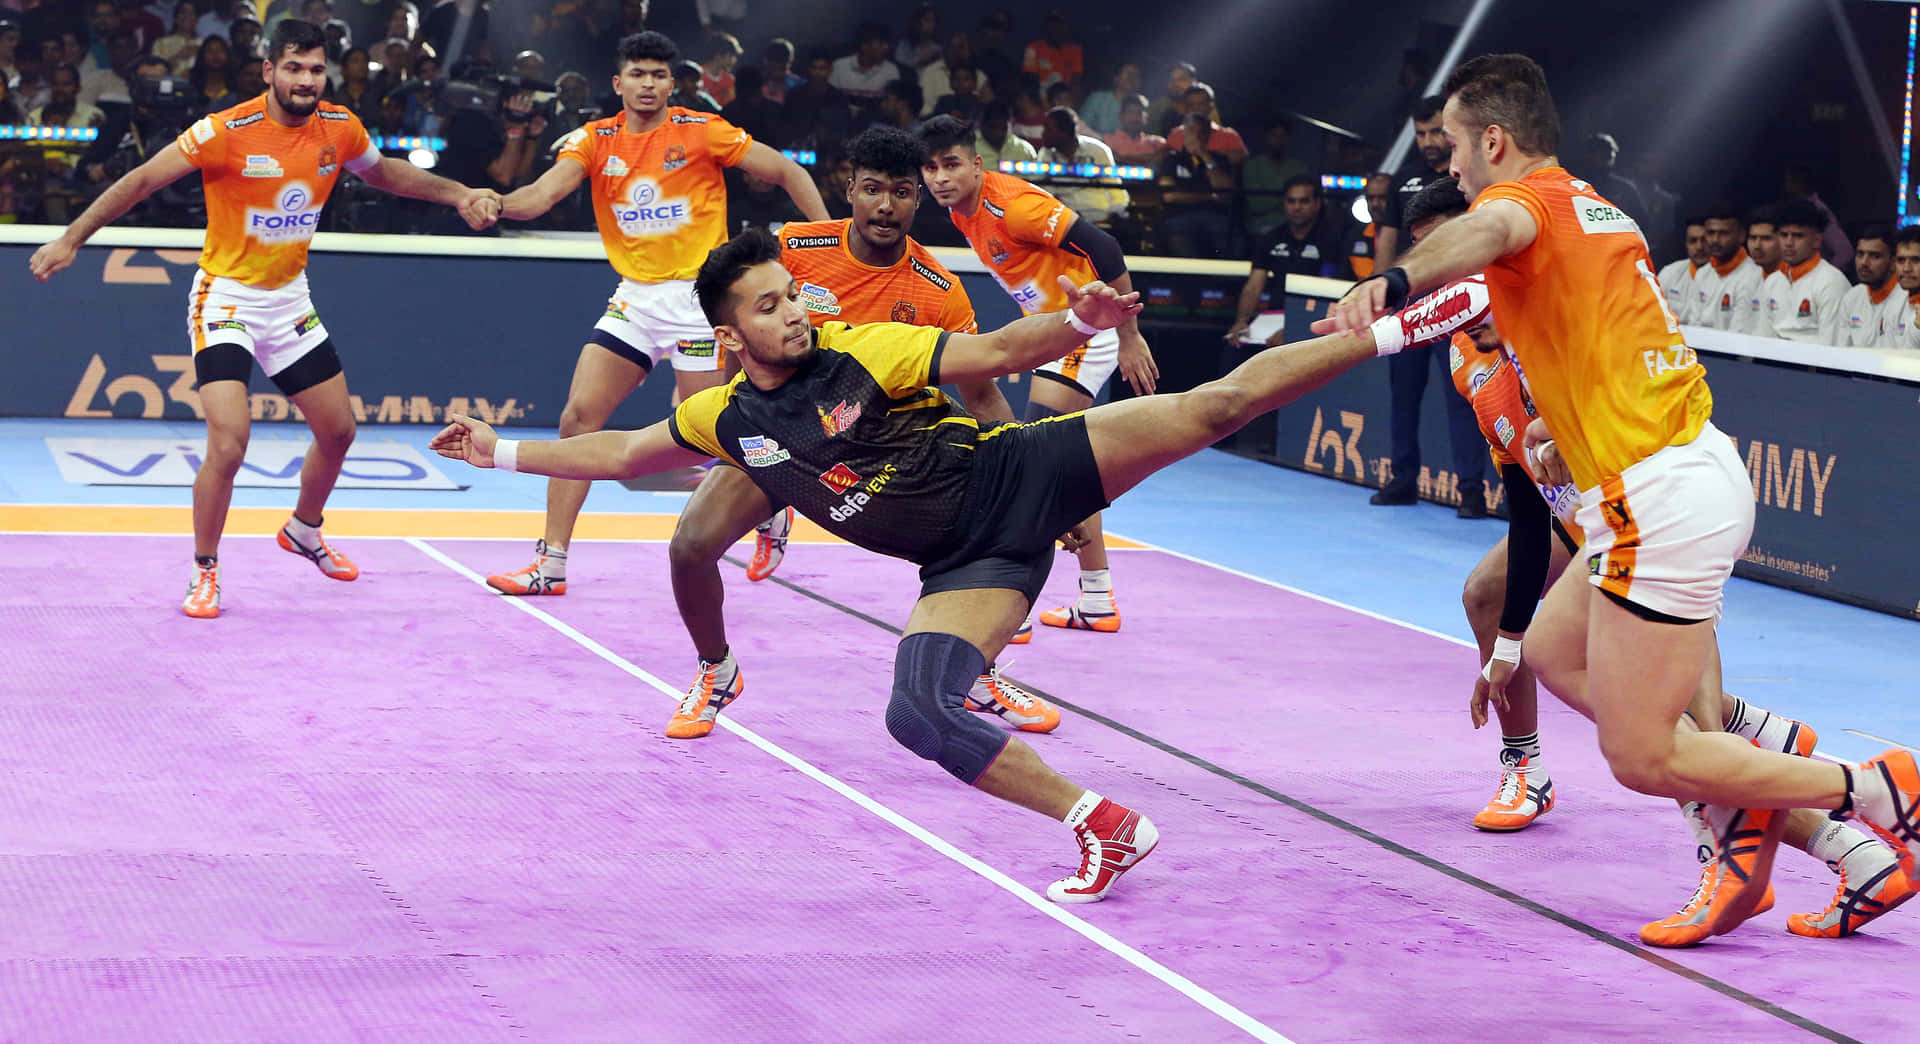 Kabaddi players in action on the court